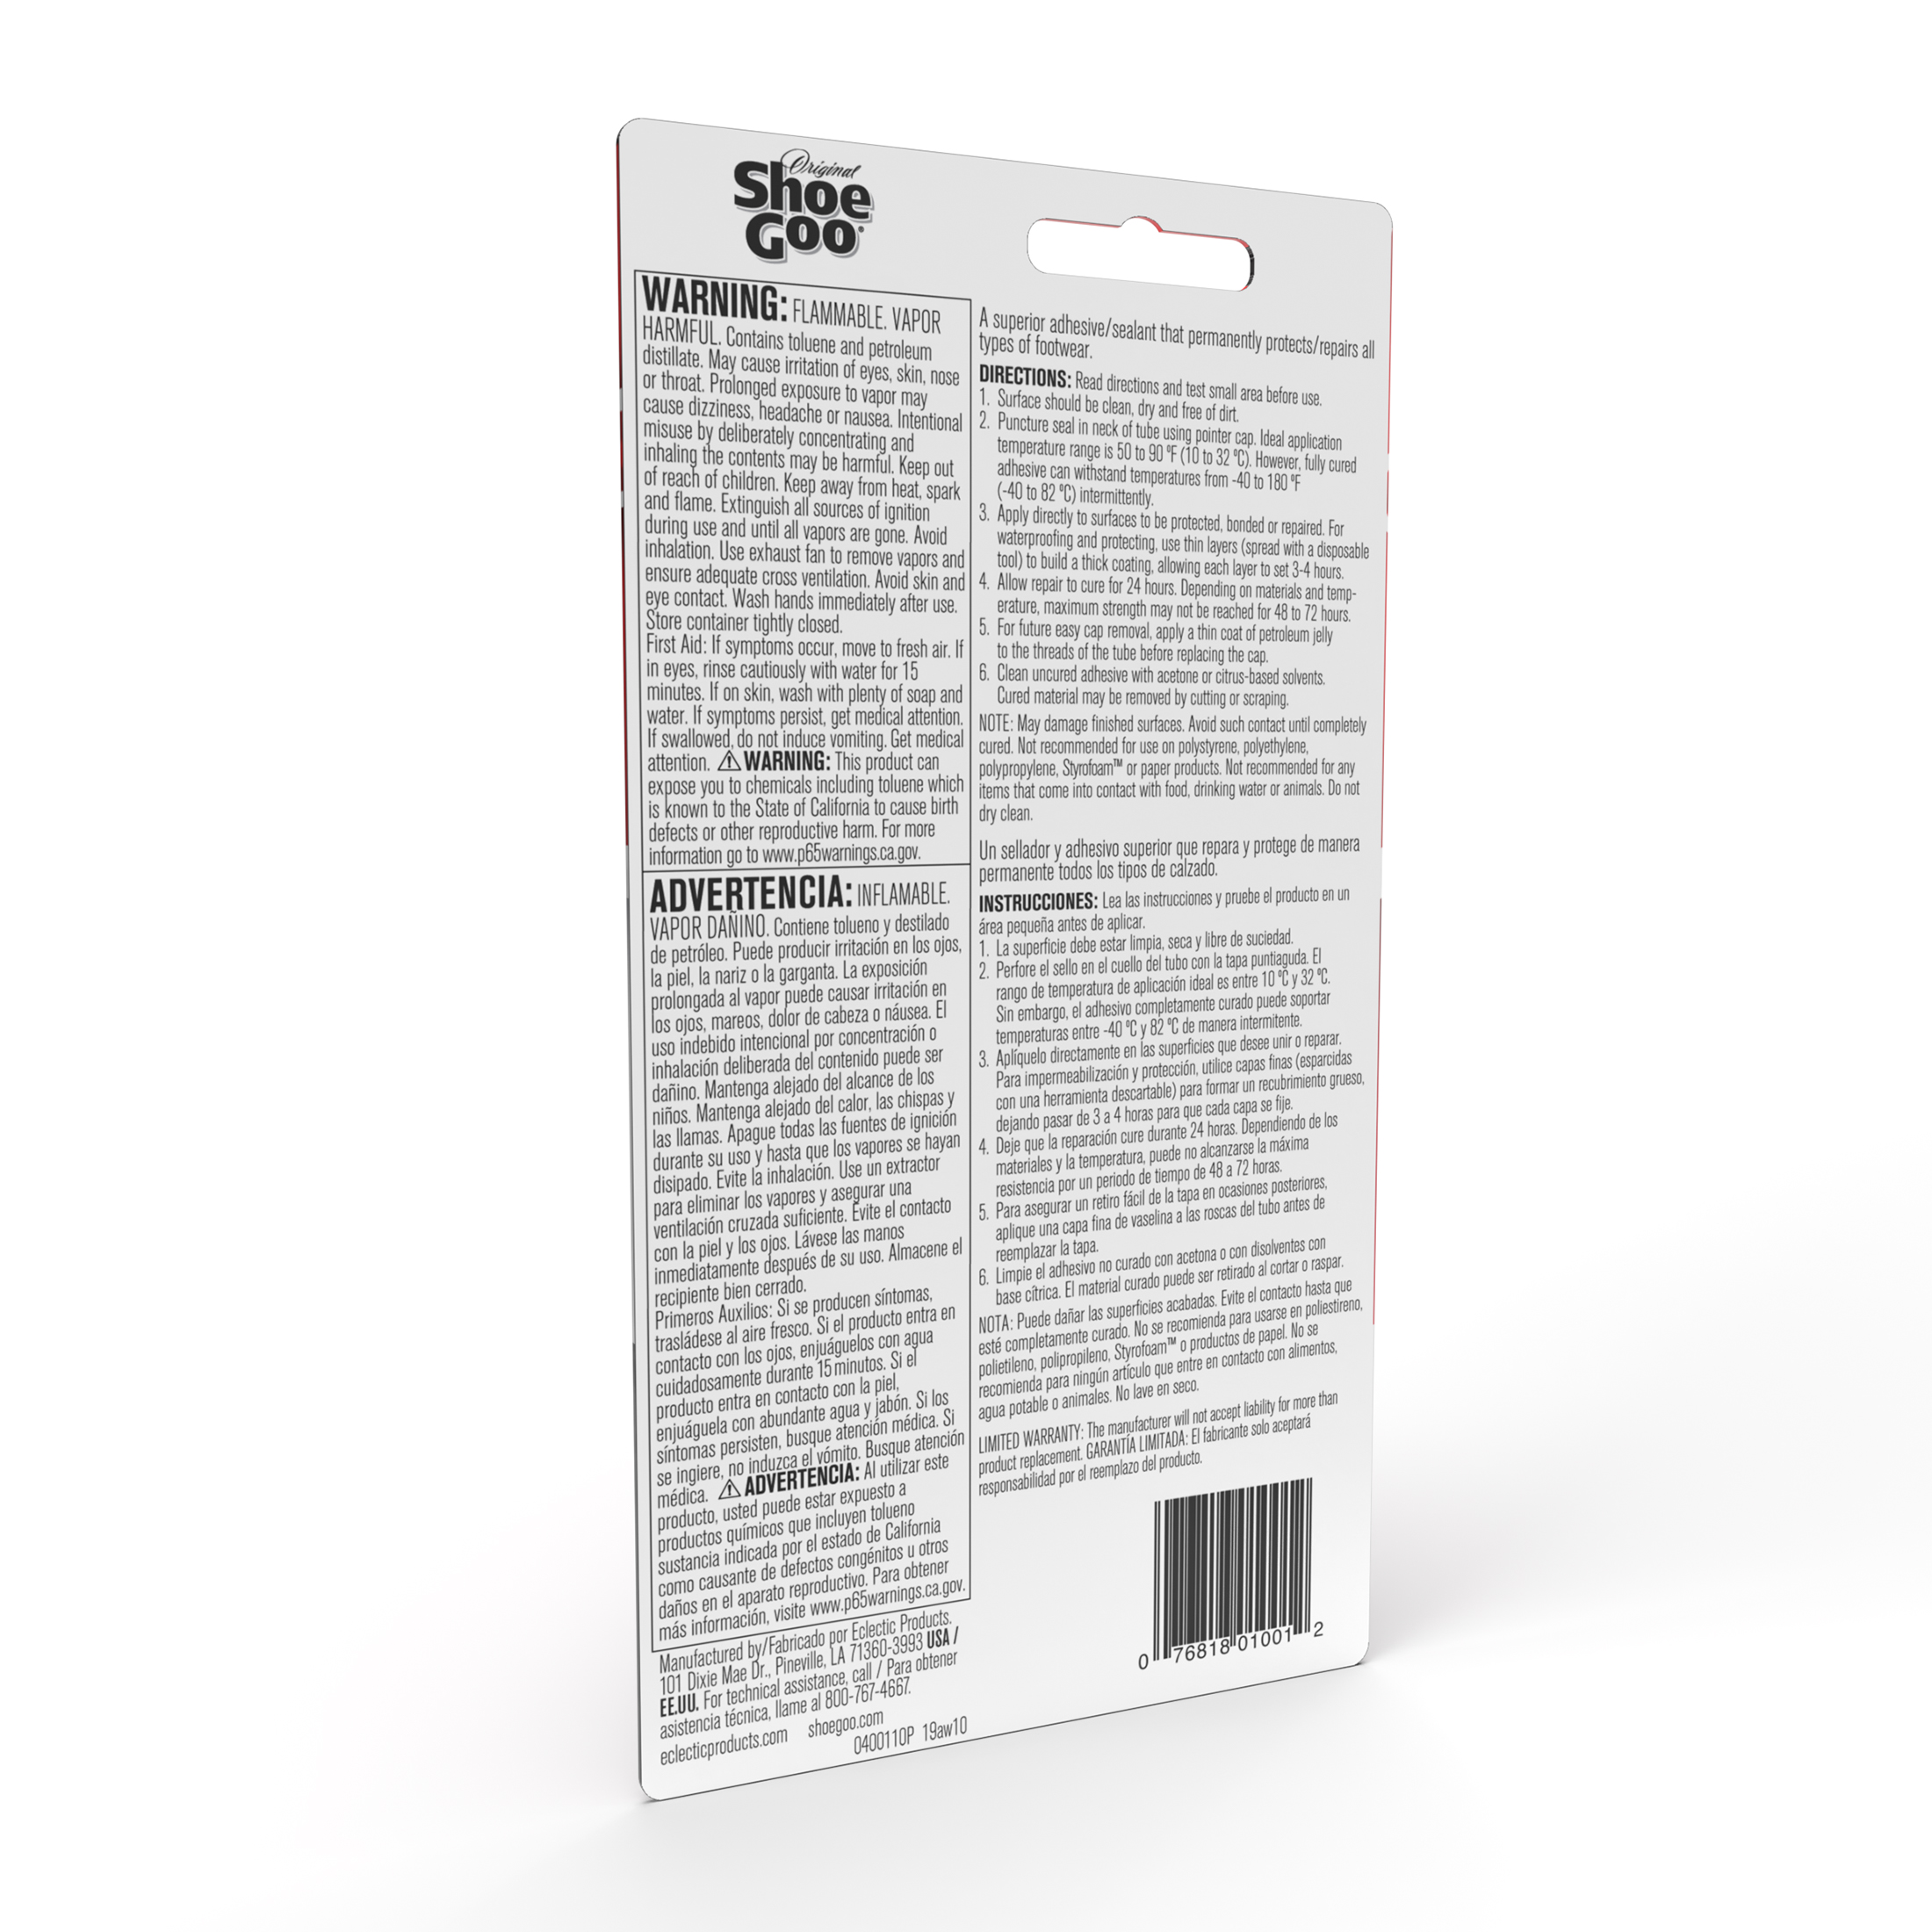 920030-6 Shoe Goo Shoe Repair Glue: Shoe GOO, Shoe Repair, 3.7 fl oz  Container Size, Tube, Clear